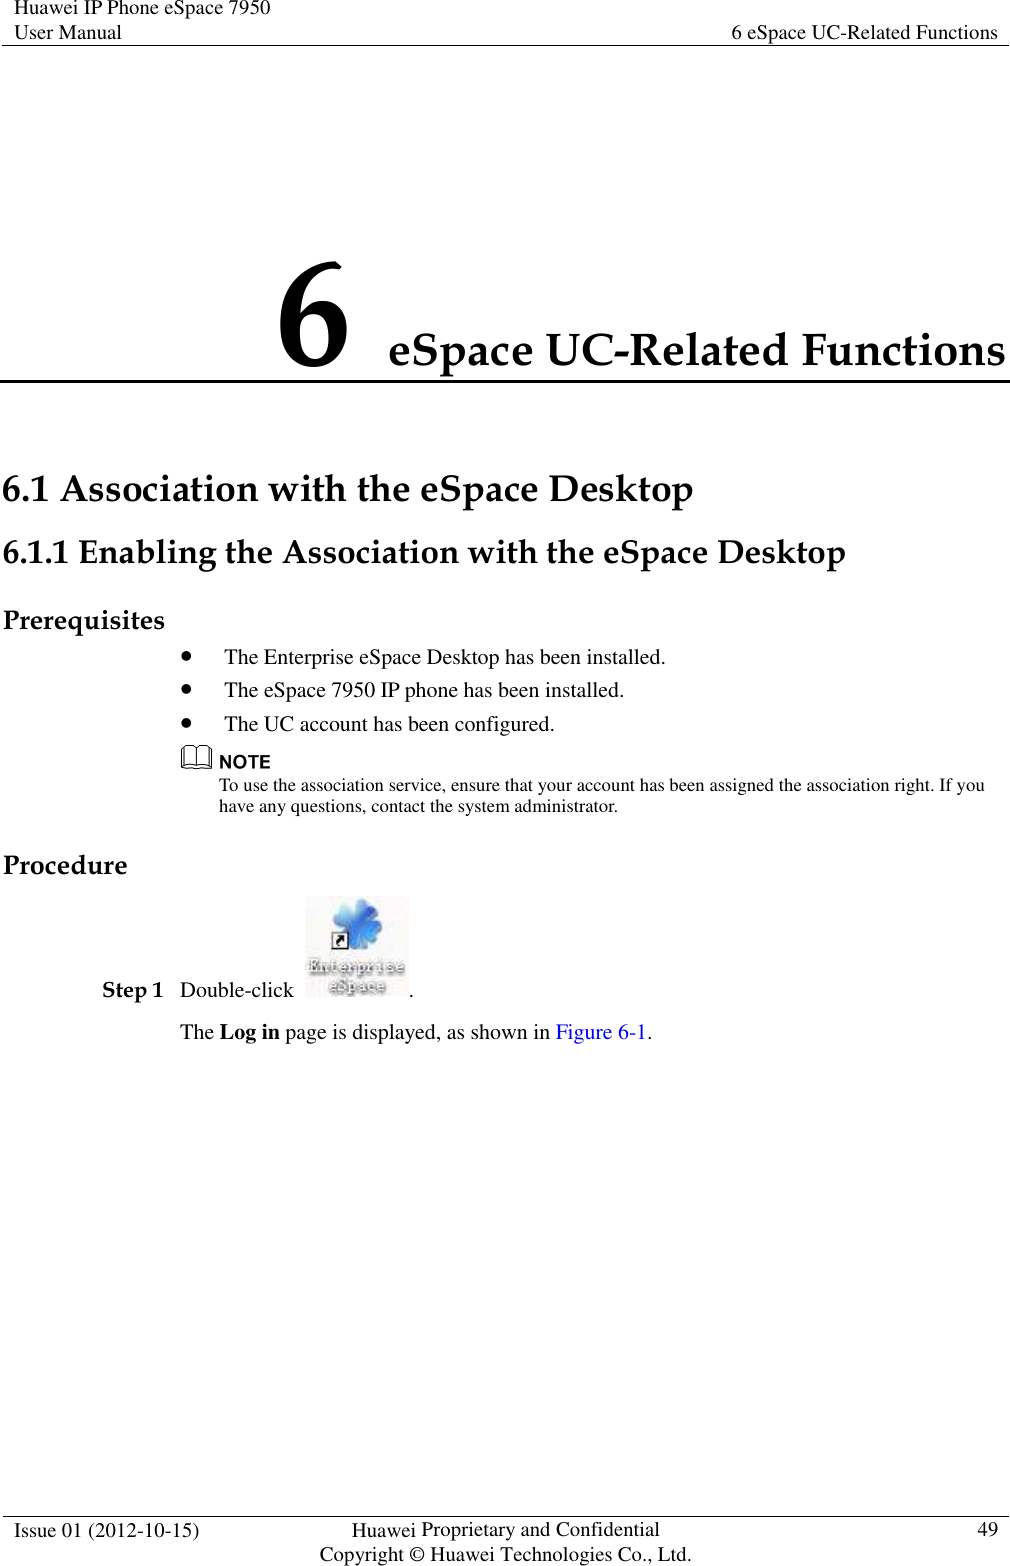 Huawei IP Phone eSpace 7950 User Manual  6 eSpace UC-Related Functions  Issue 01 (2012-10-15)  Huawei Proprietary and Confidential                                     Copyright © Huawei Technologies Co., Ltd.  49  6 eSpace UC-Related Functions 6.1 Association with the eSpace Desktop 6.1.1 Enabling the Association with the eSpace Desktop Prerequisites  The Enterprise eSpace Desktop has been installed.  The eSpace 7950 IP phone has been installed.  The UC account has been configured.  To use the association service, ensure that your account has been assigned the association right. If you have any questions, contact the system administrator. Procedure Step 1 Double-click  . The Log in page is displayed, as shown in Figure 6-1. 